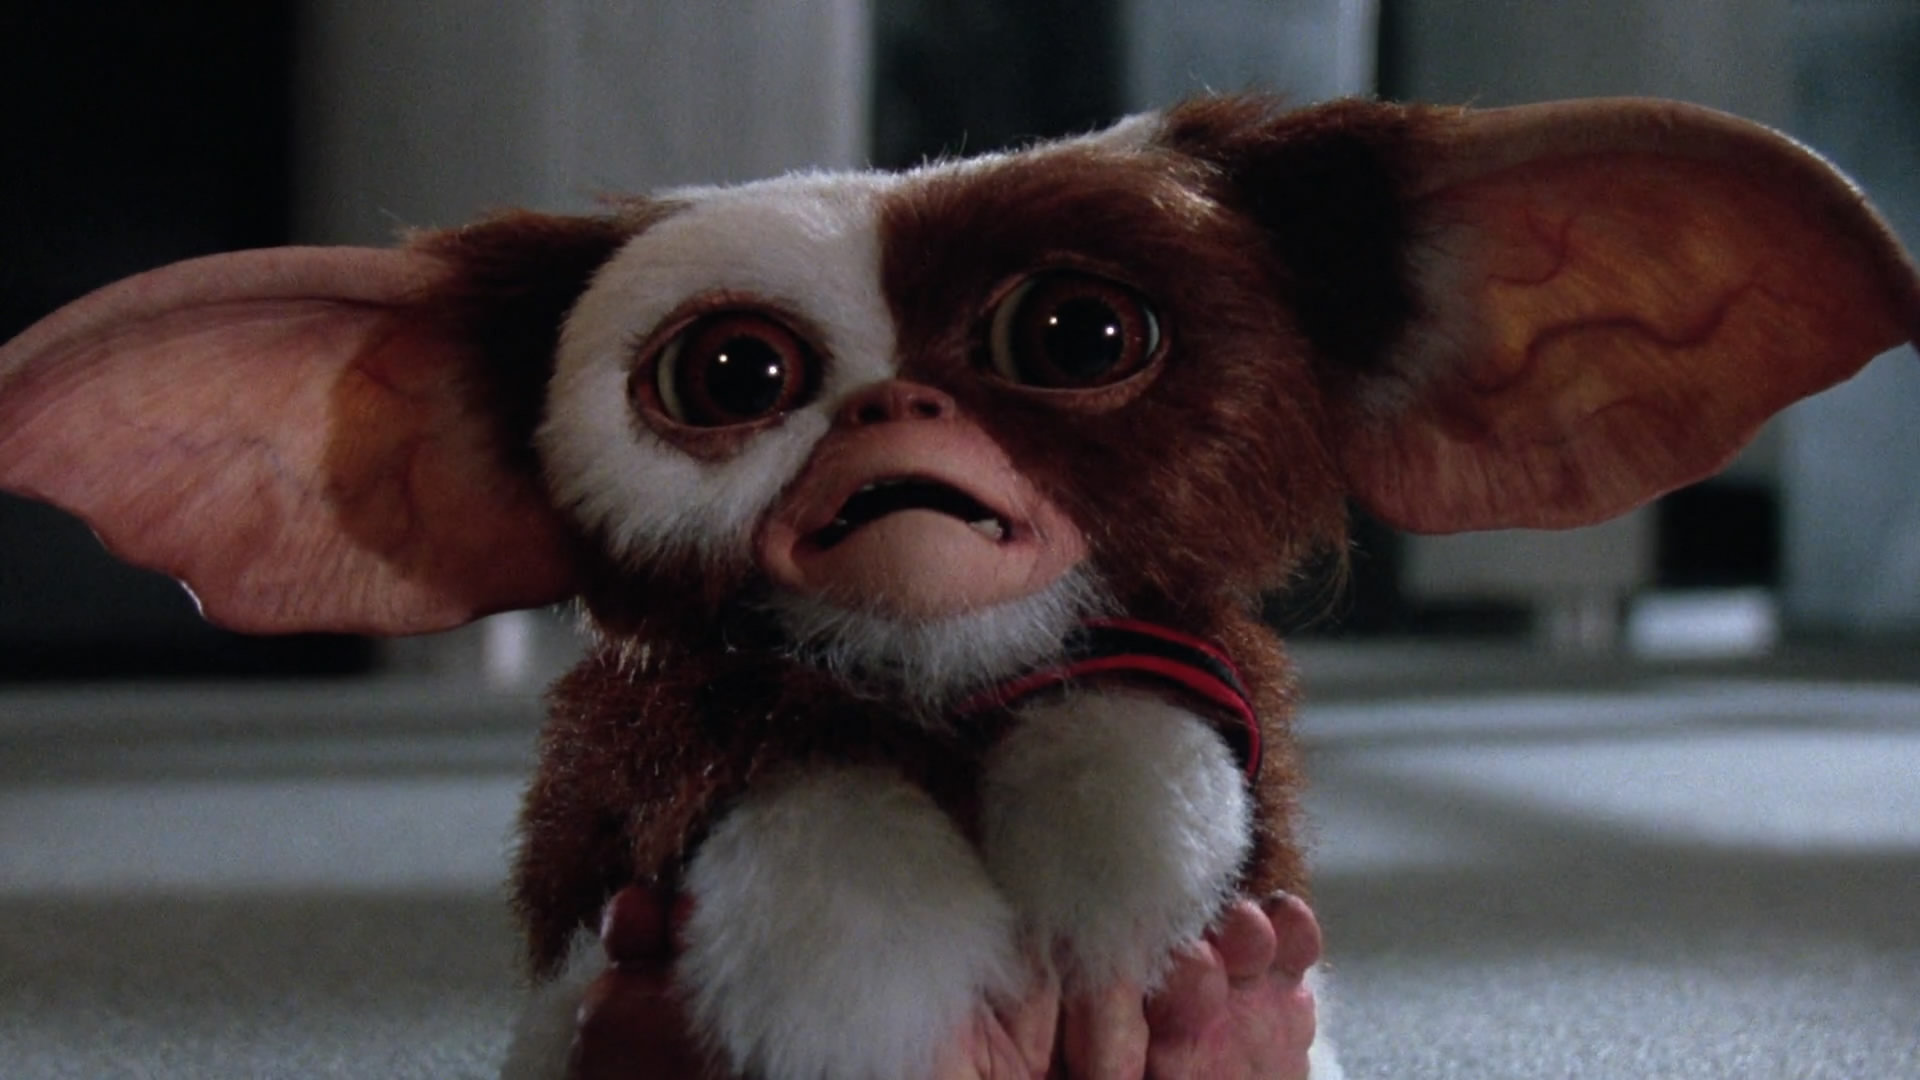 Gremlin Gizmo: Giz with a shotgun, Mogwai that as adept as the monsters are with weapons and electrical devices. 1920x1080 Full HD Background.